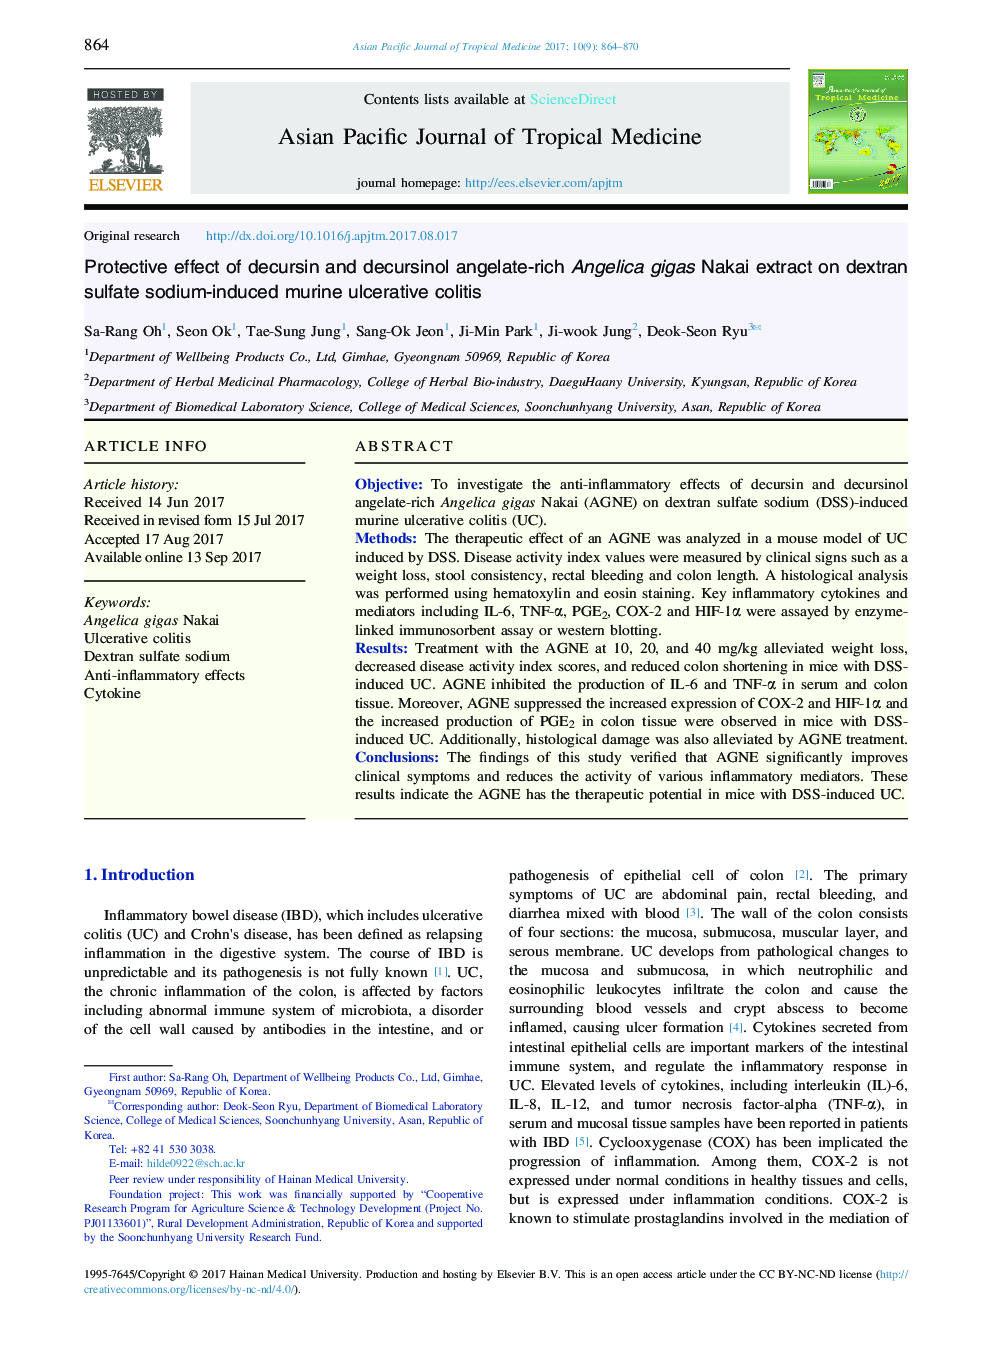 Protective effect of decursin and decursinol angelate-rich Angelica gigas Nakai extract on dextran sulfate sodium-induced murine ulcerative colitis